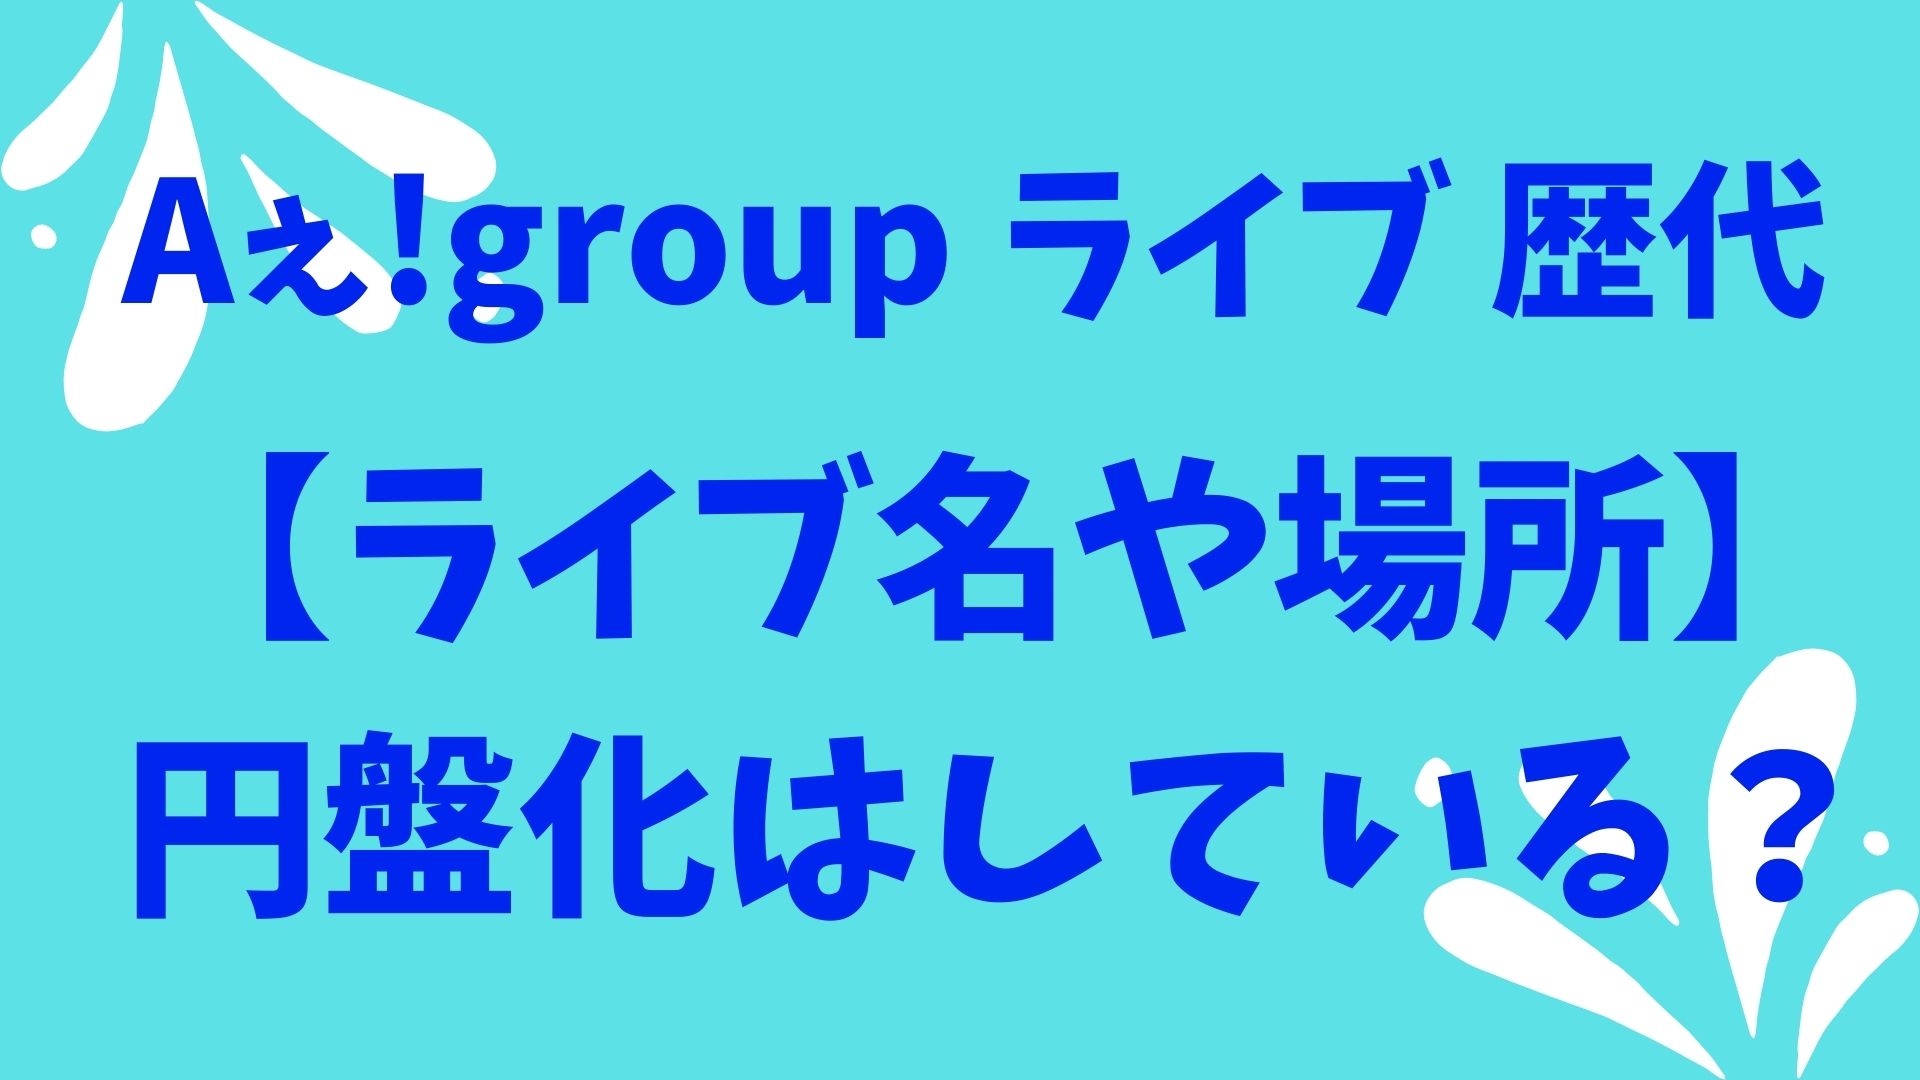 Aちゃん様 専用 Aぇ！group Ambitious | Aちゃん様 専用 Aぇ!group 